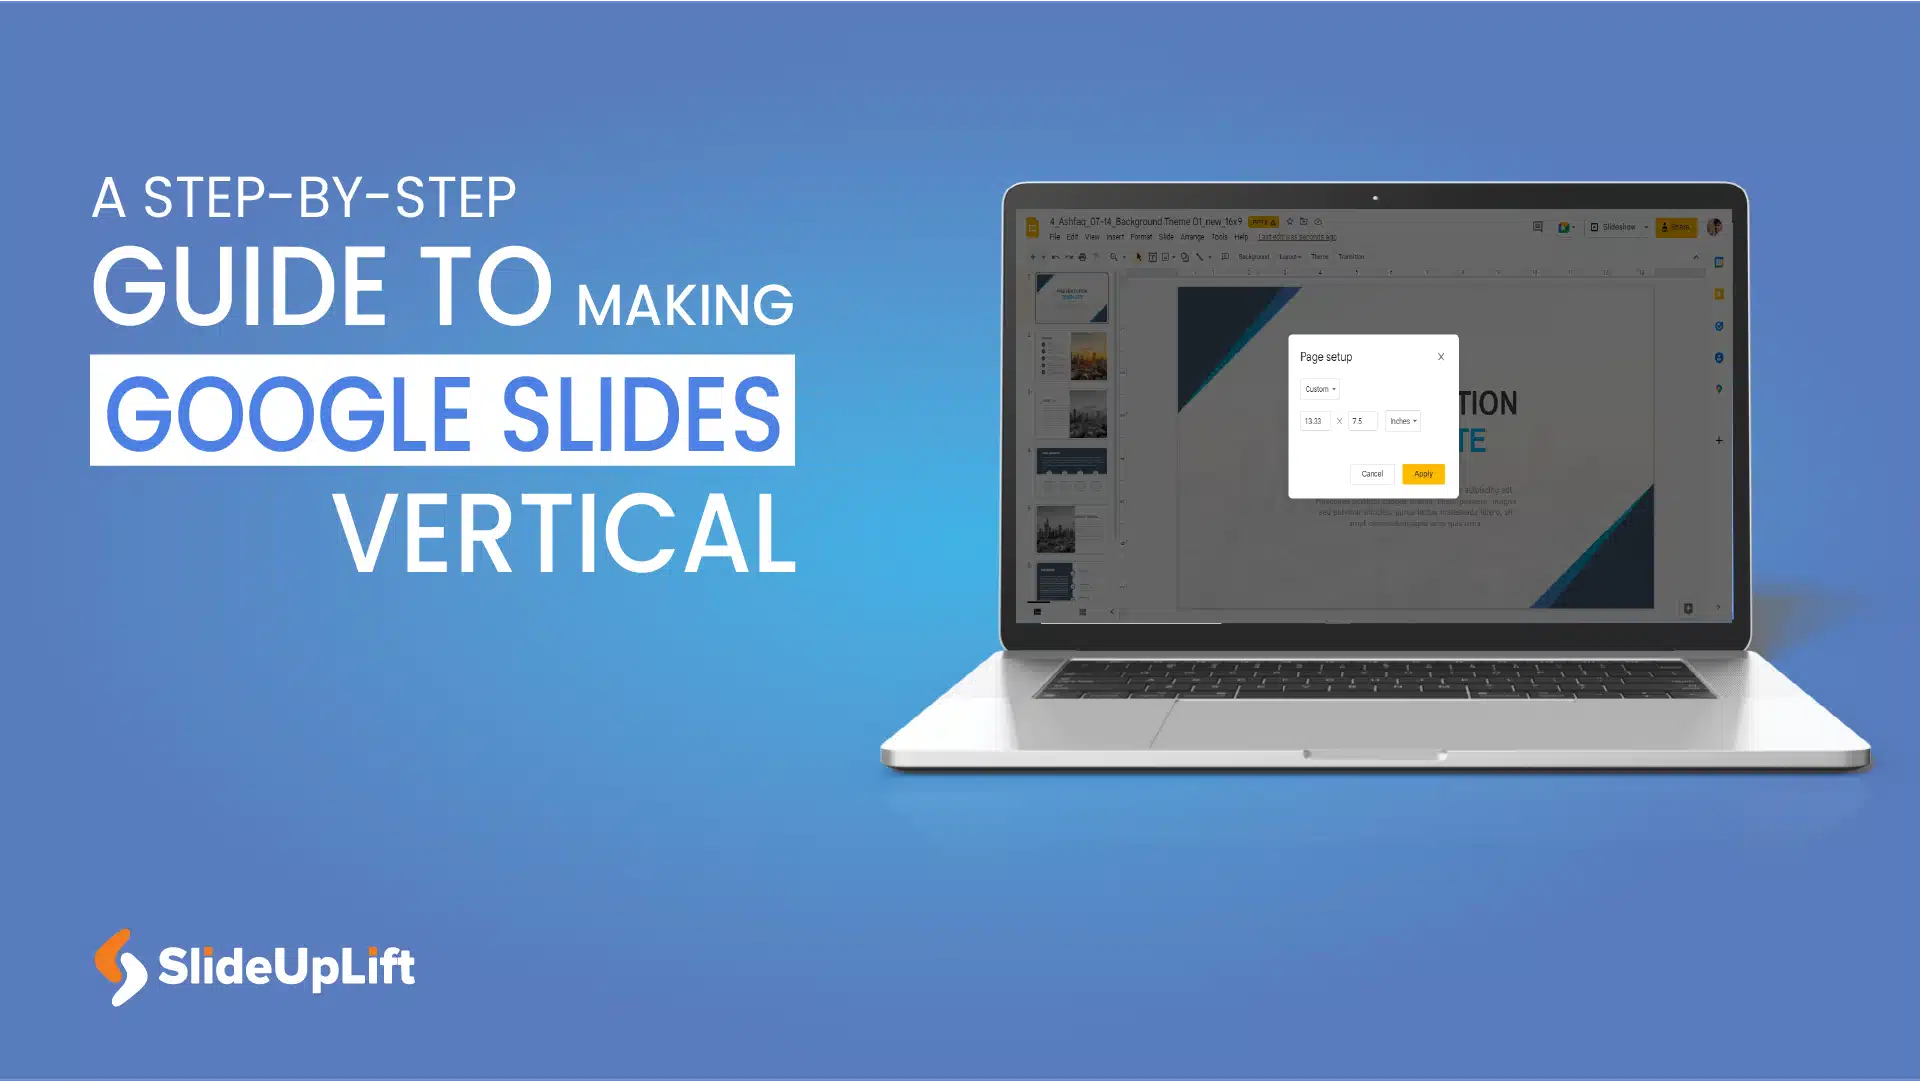 A Step-By-Step Guide To Making Google Slides Vertical